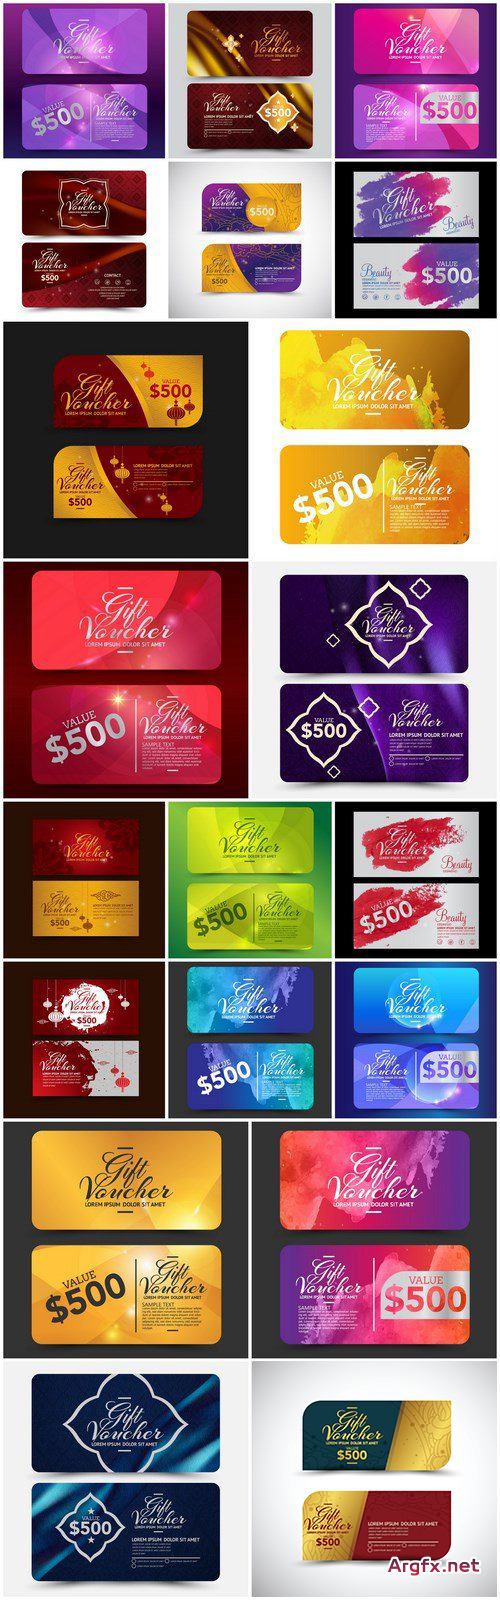 Gift Voucher Collection #31 - 20 Vector